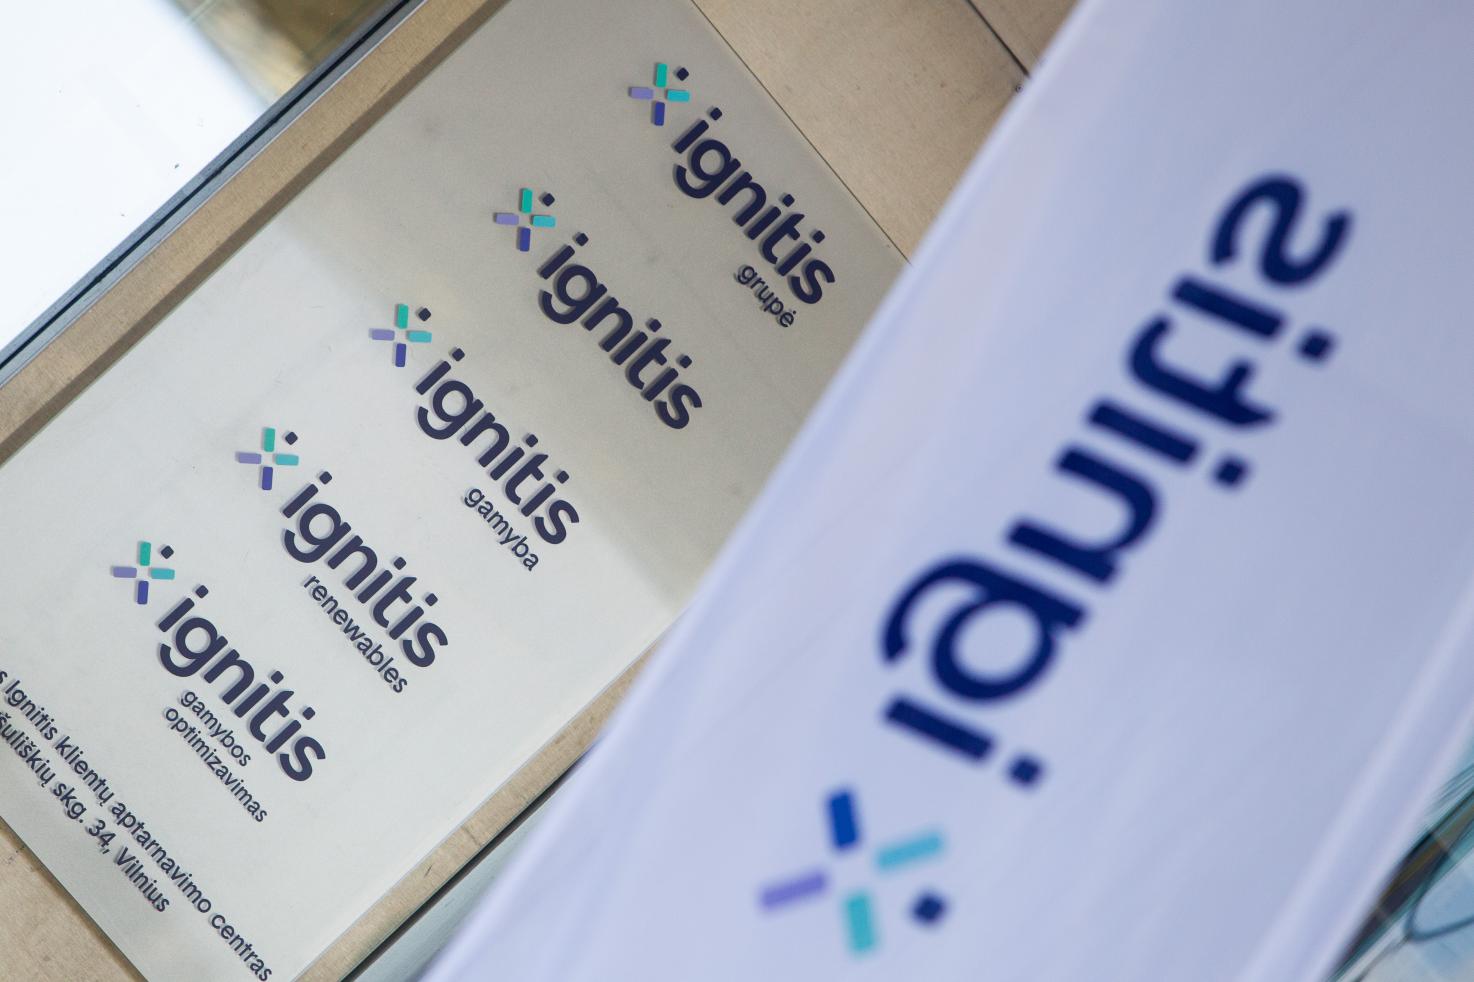 	29 July, 2021 The Extraordinary General Meeting of shareholders of AB “Ignitis grupė” 